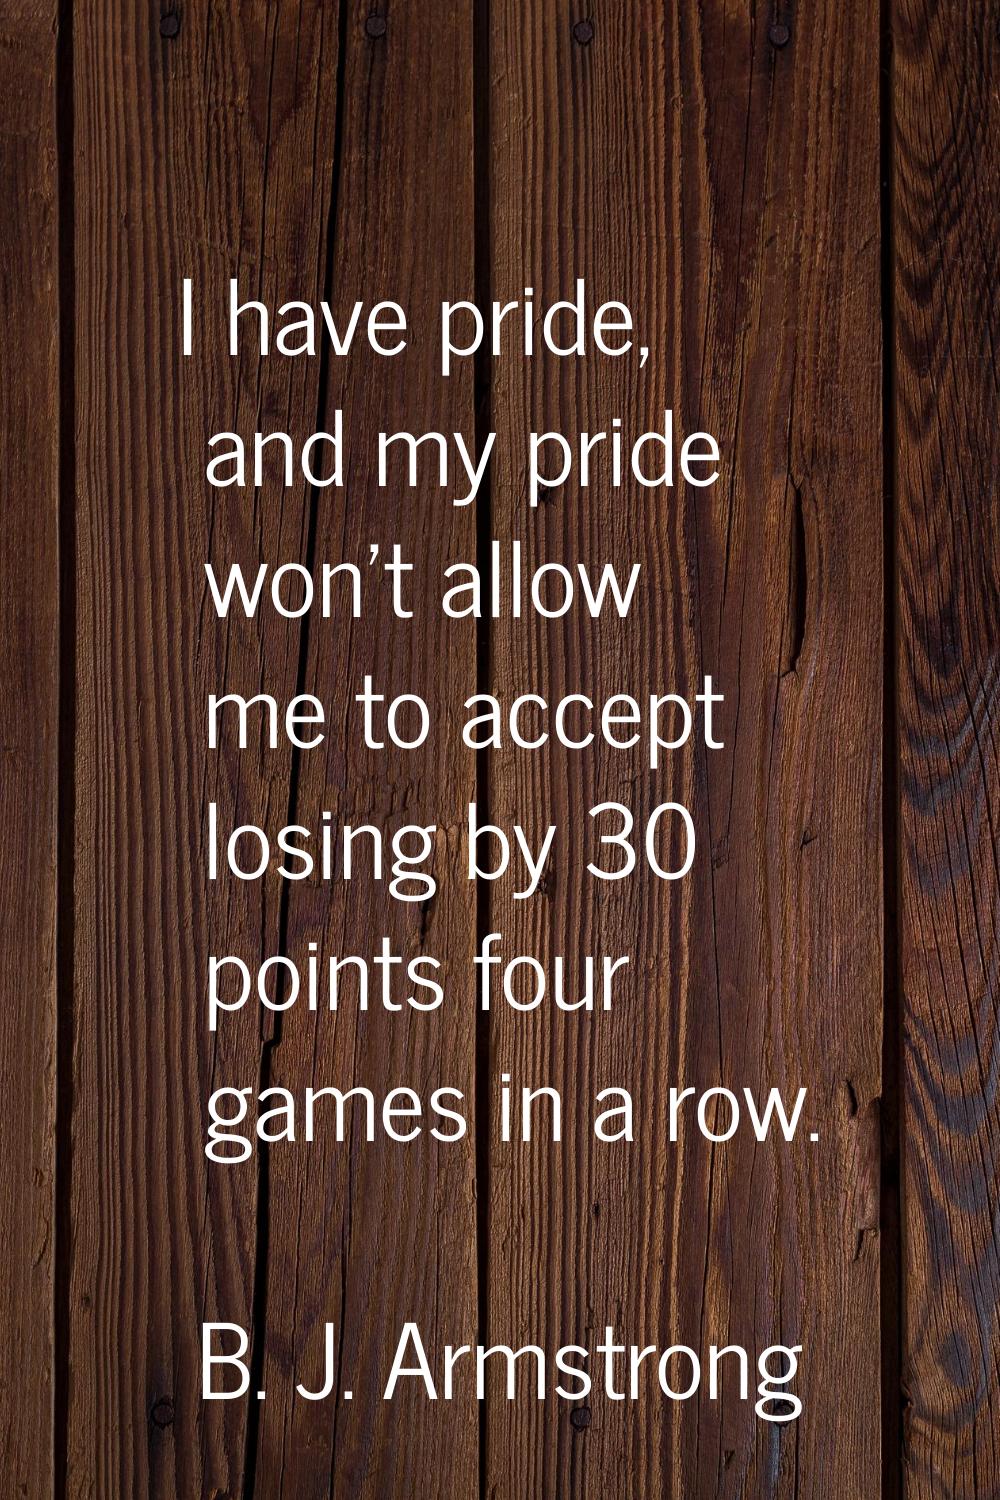 I have pride, and my pride won't allow me to accept losing by 30 points four games in a row.